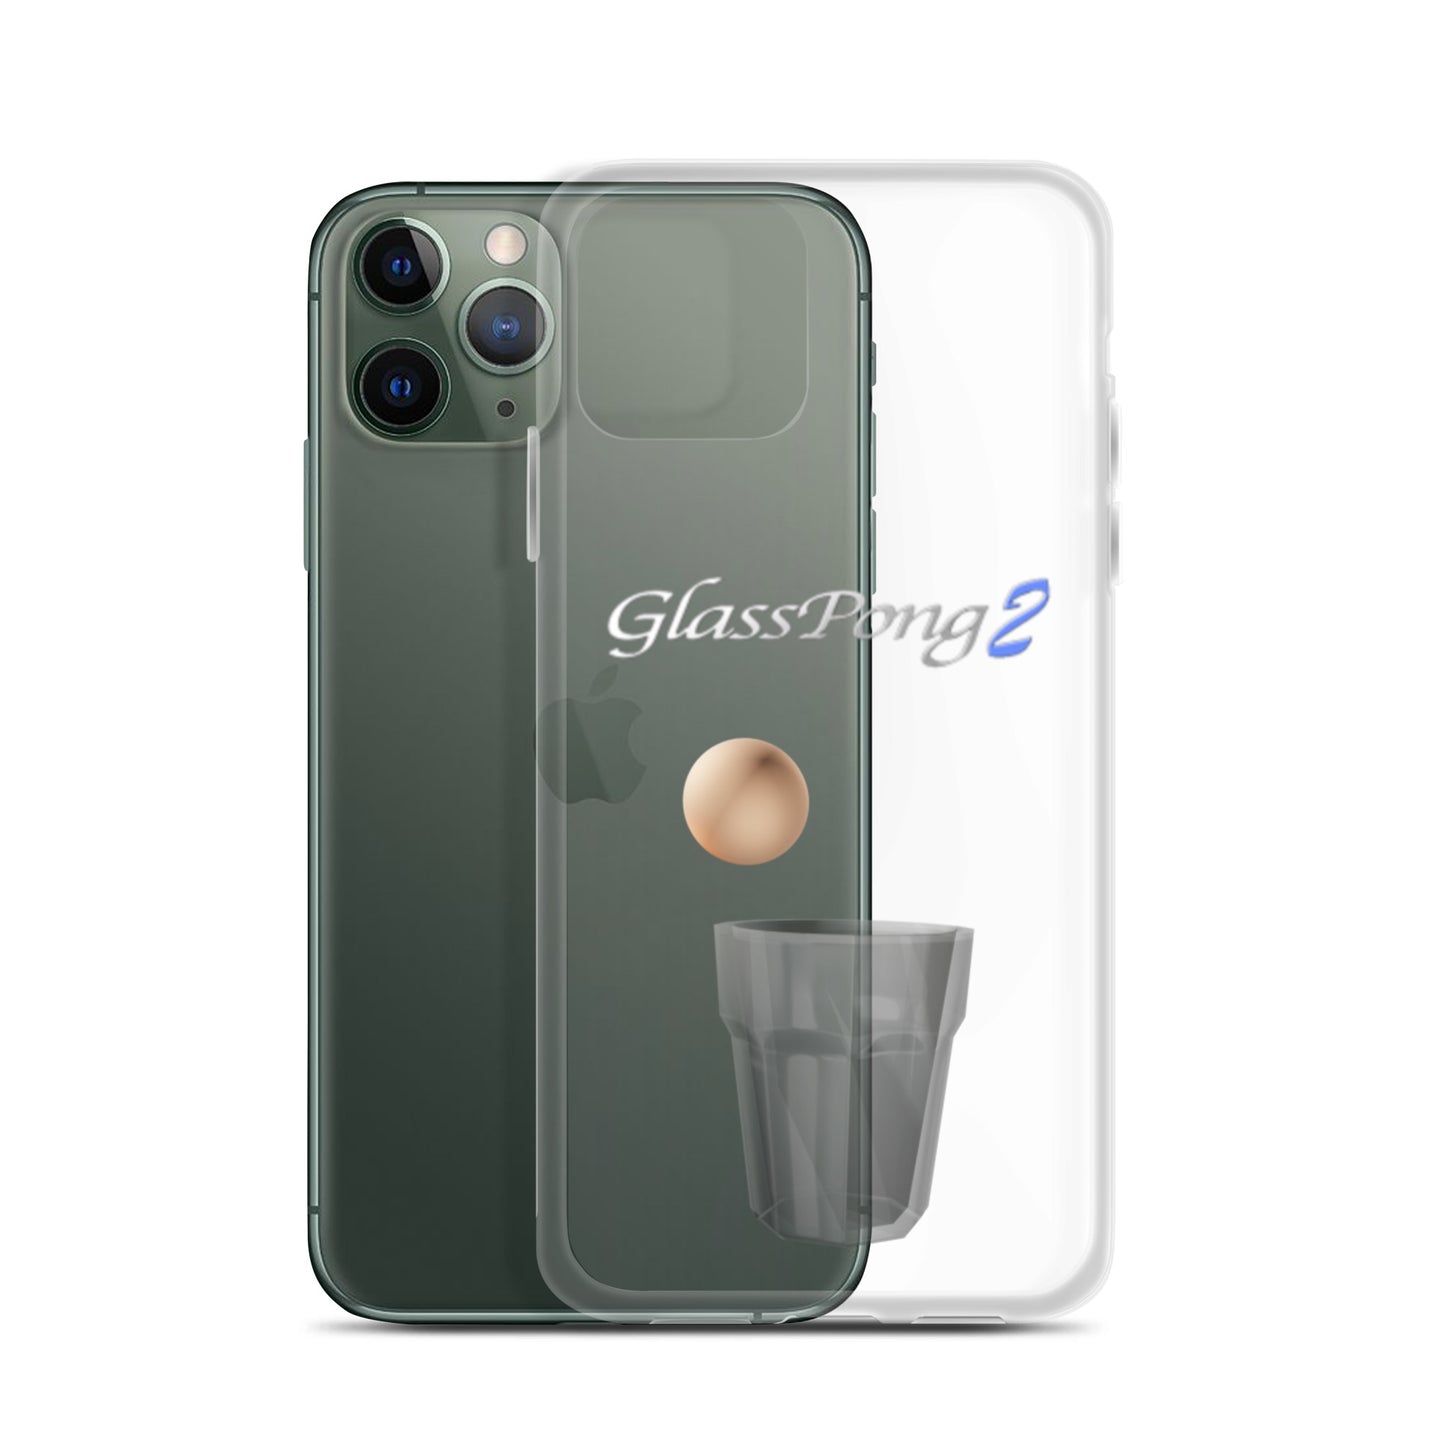 GlassPong2 ping pong ball in glass iPhone case